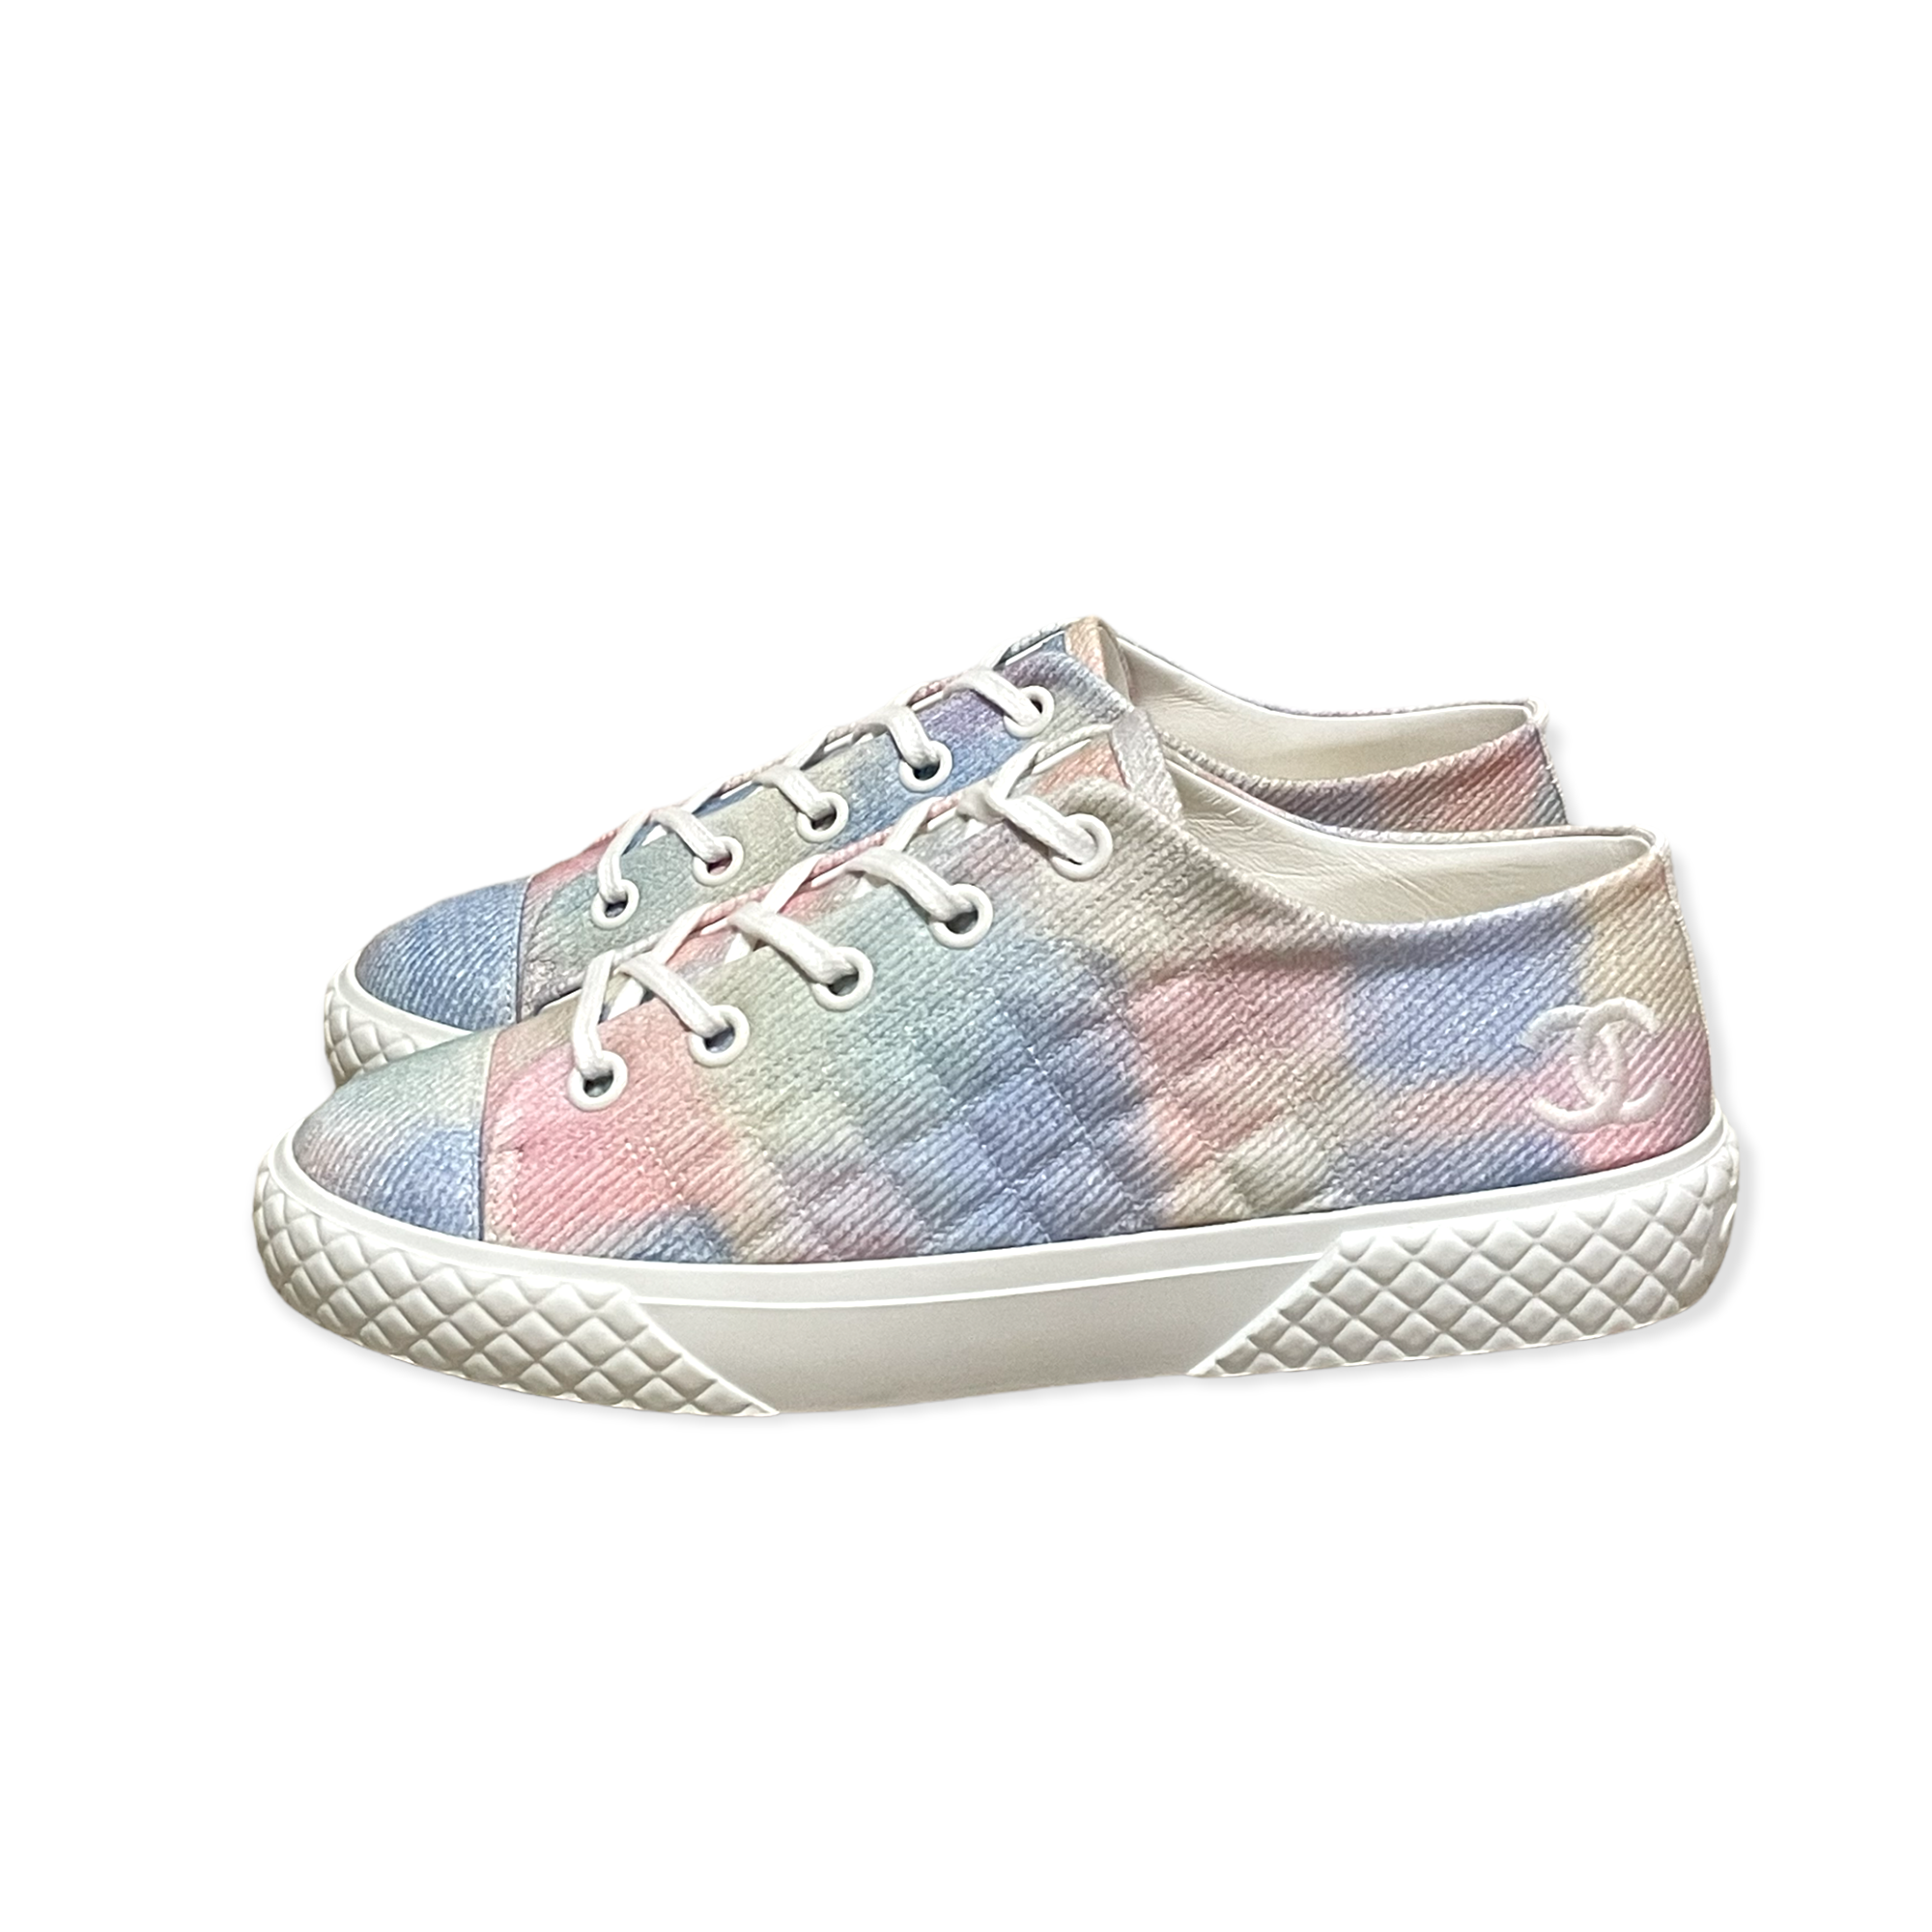 CHANEL 22C Printed Fabric Green, Pink, Blue & White Sneakers |Size:39|